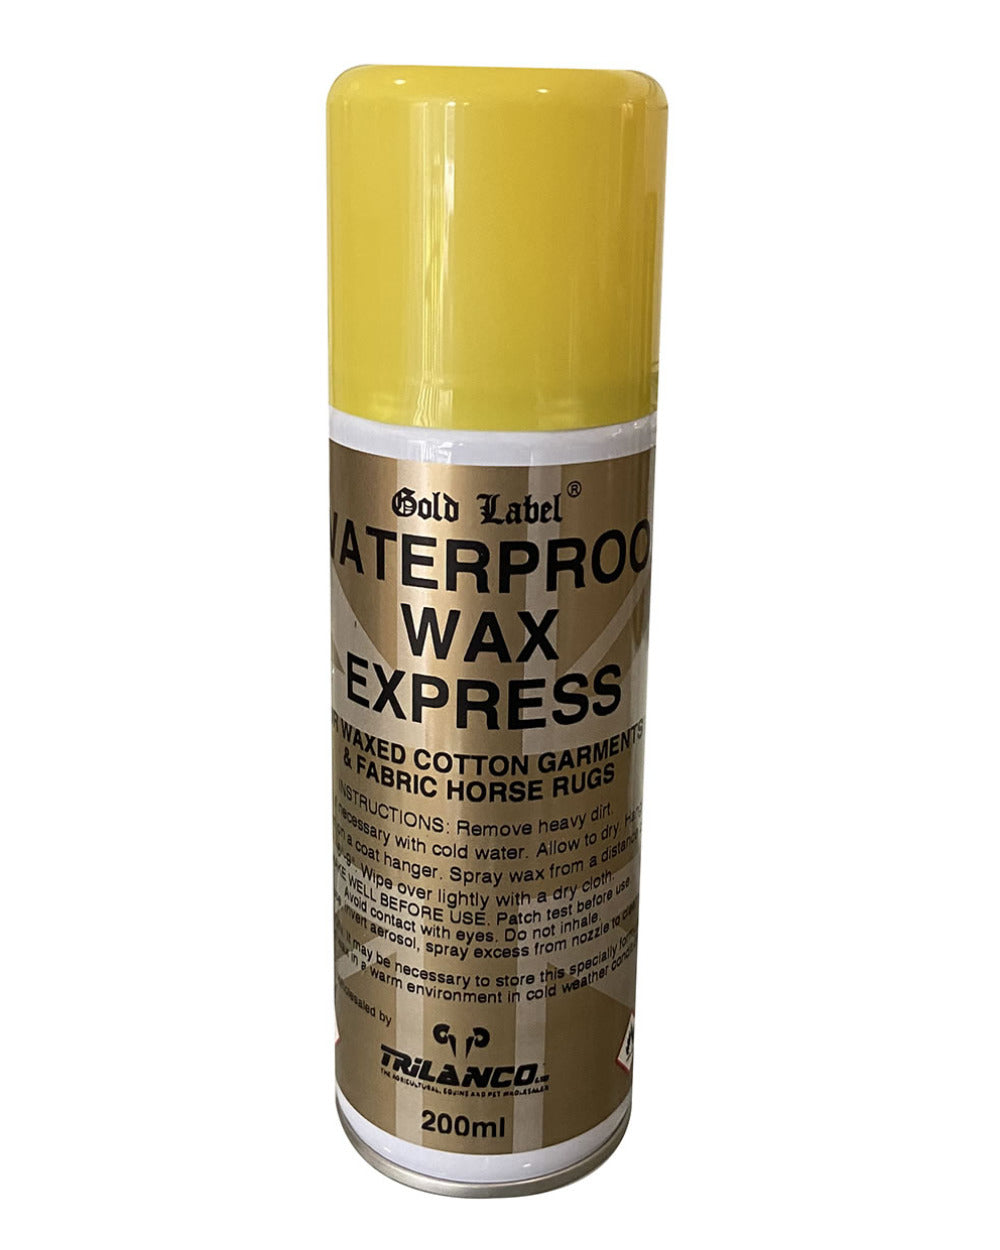 Gold Label Waterproof Wax Express On A White Background